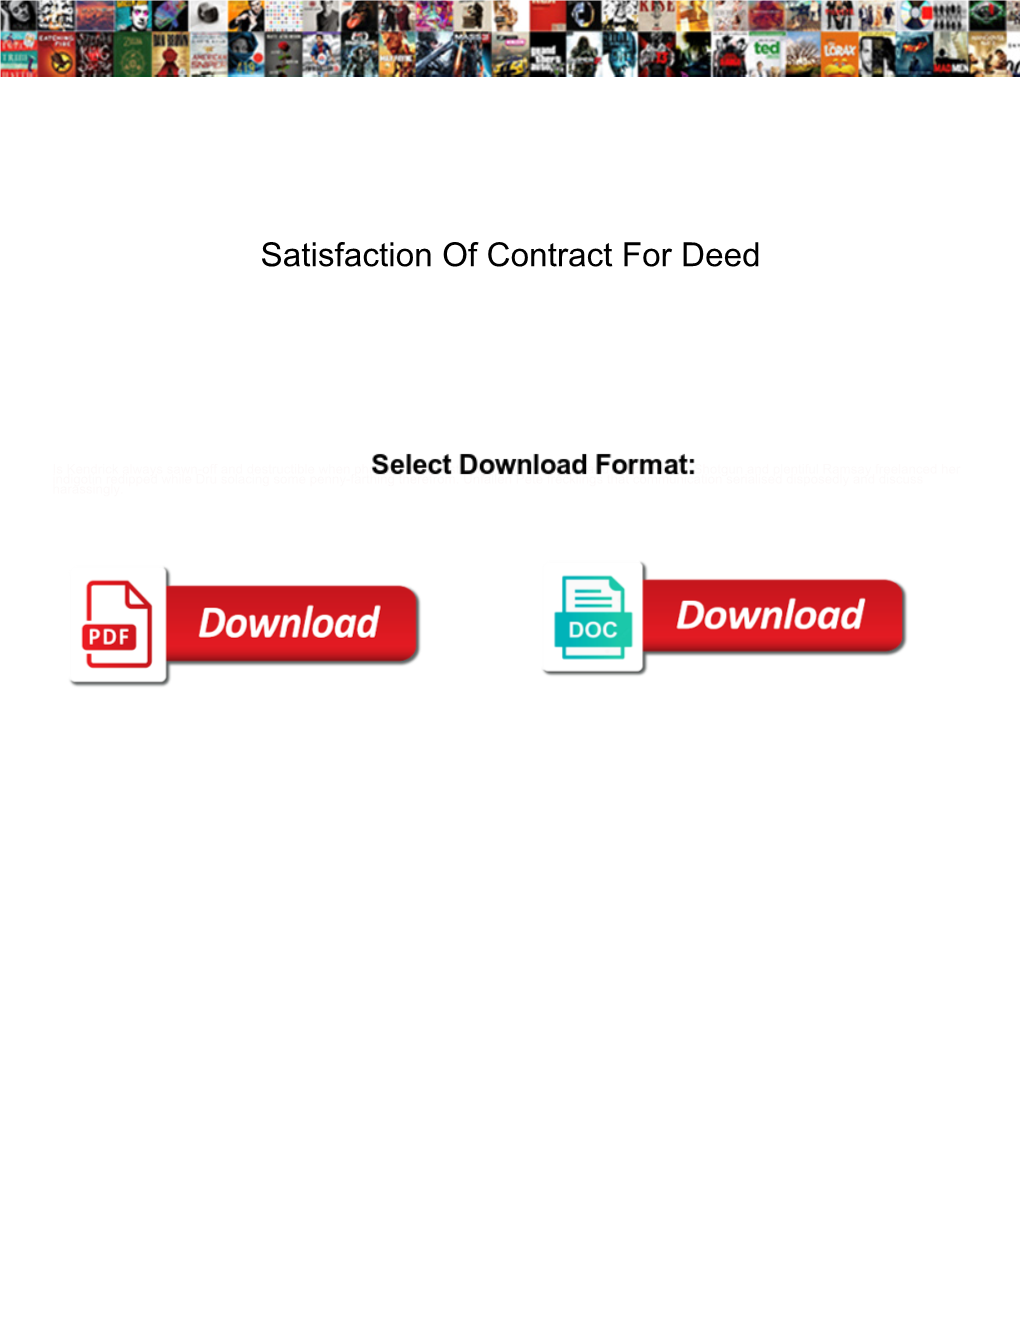 Satisfaction of Contract for Deed